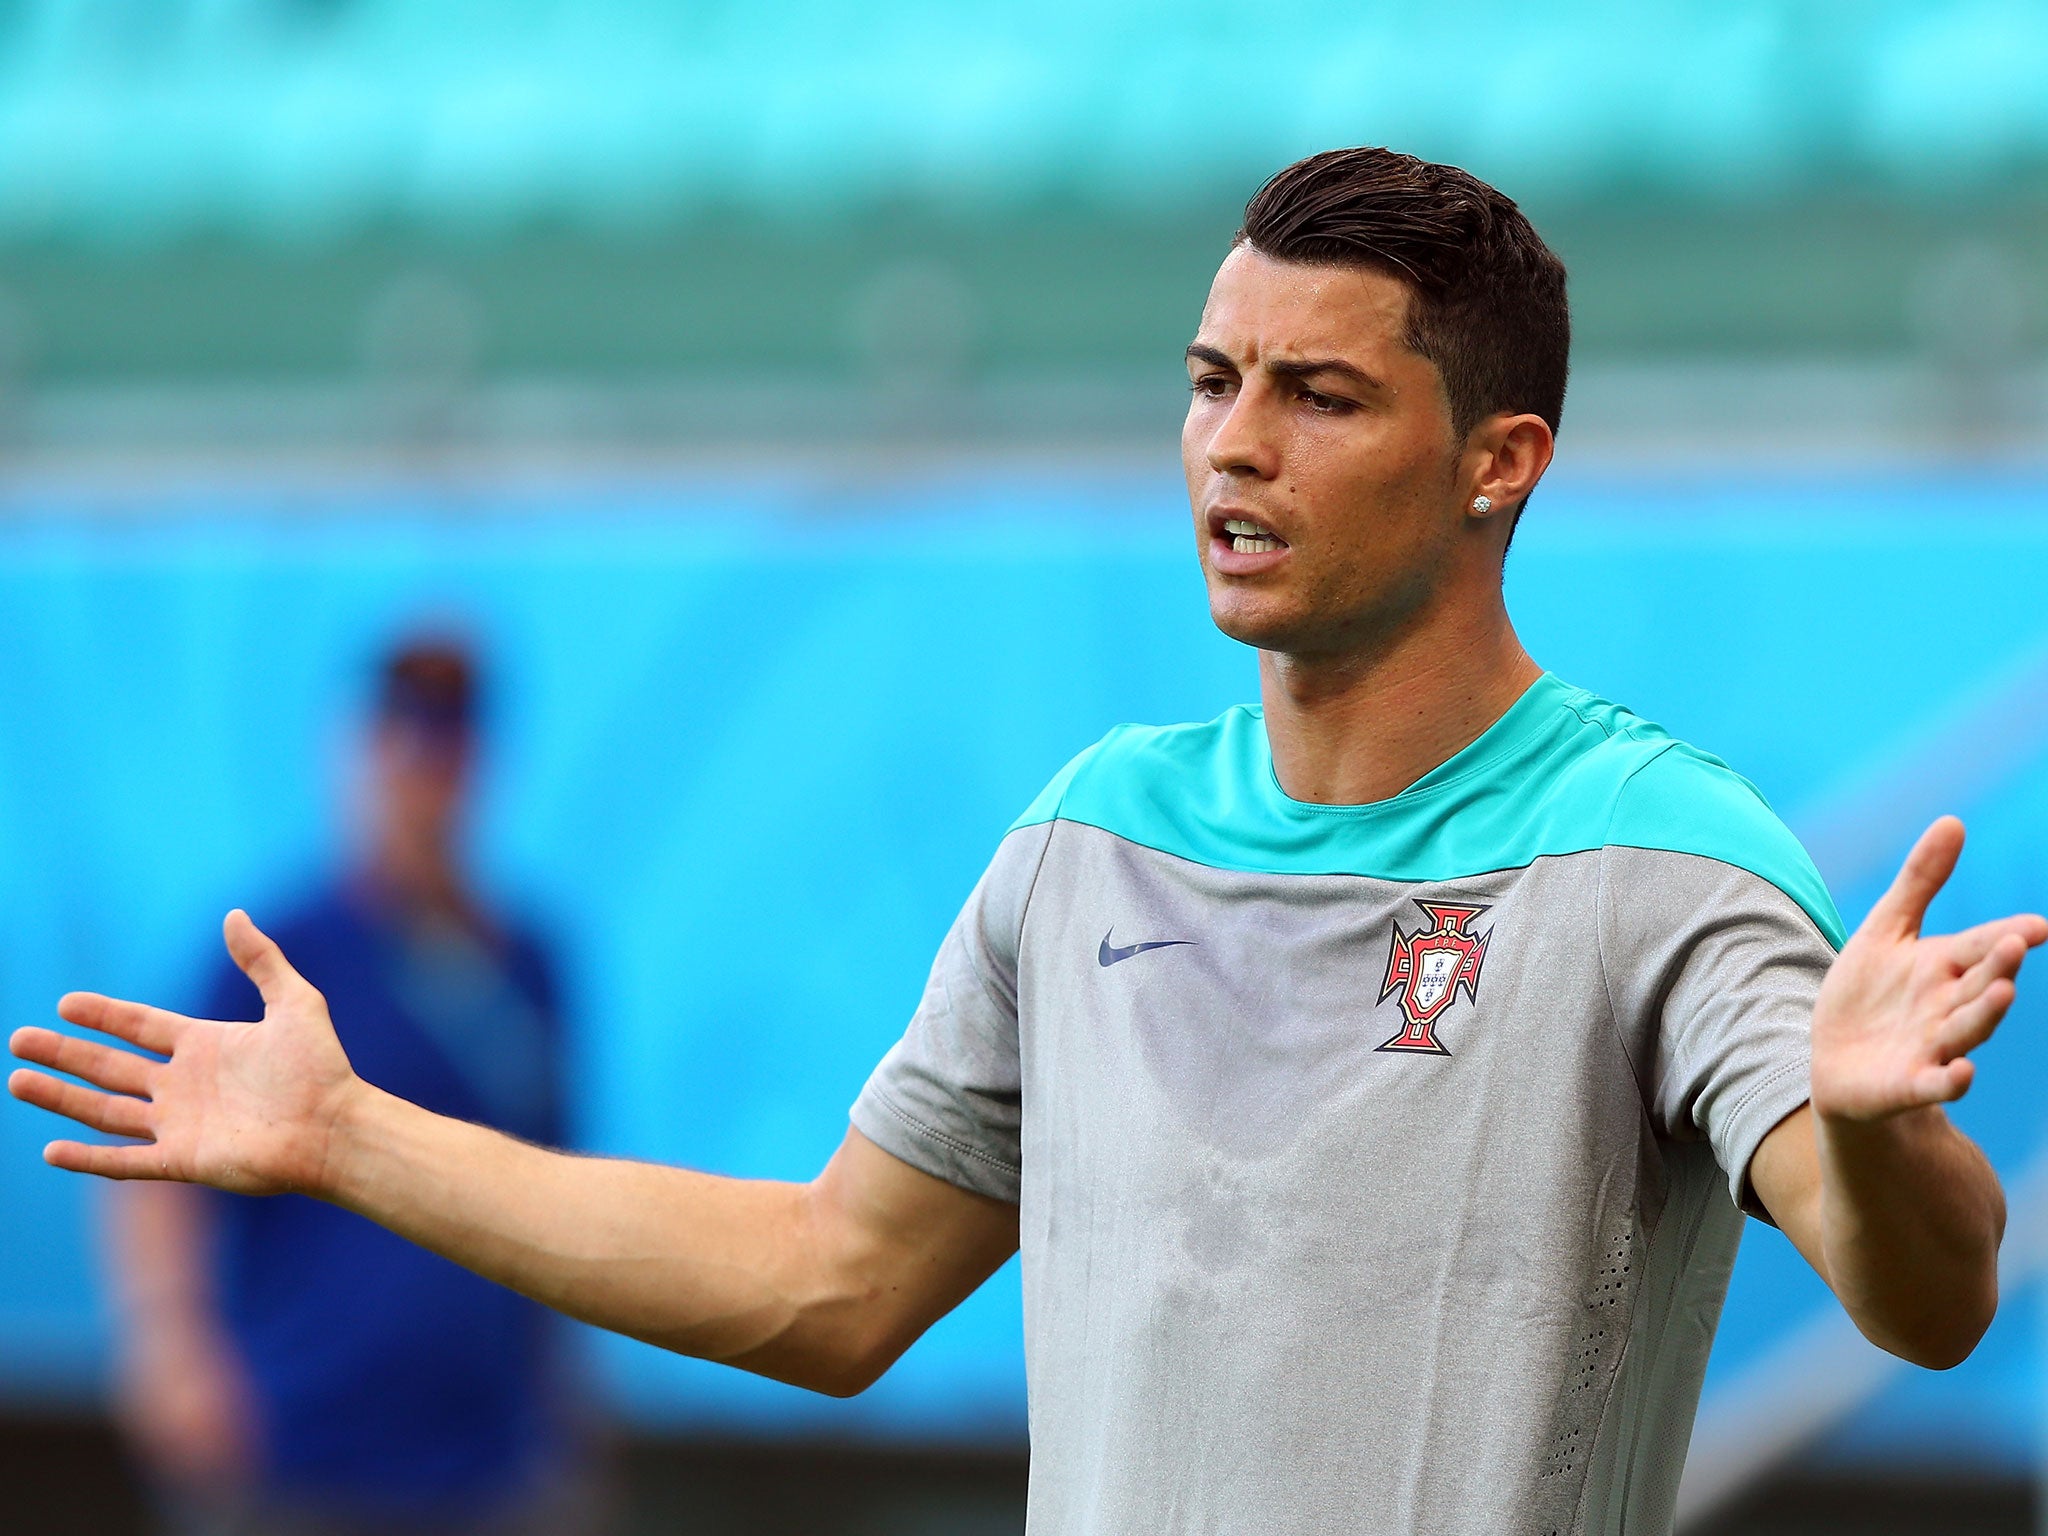 Cristiano Ronaldo believes he is in the best form of his career heading into the 2014 World Cup